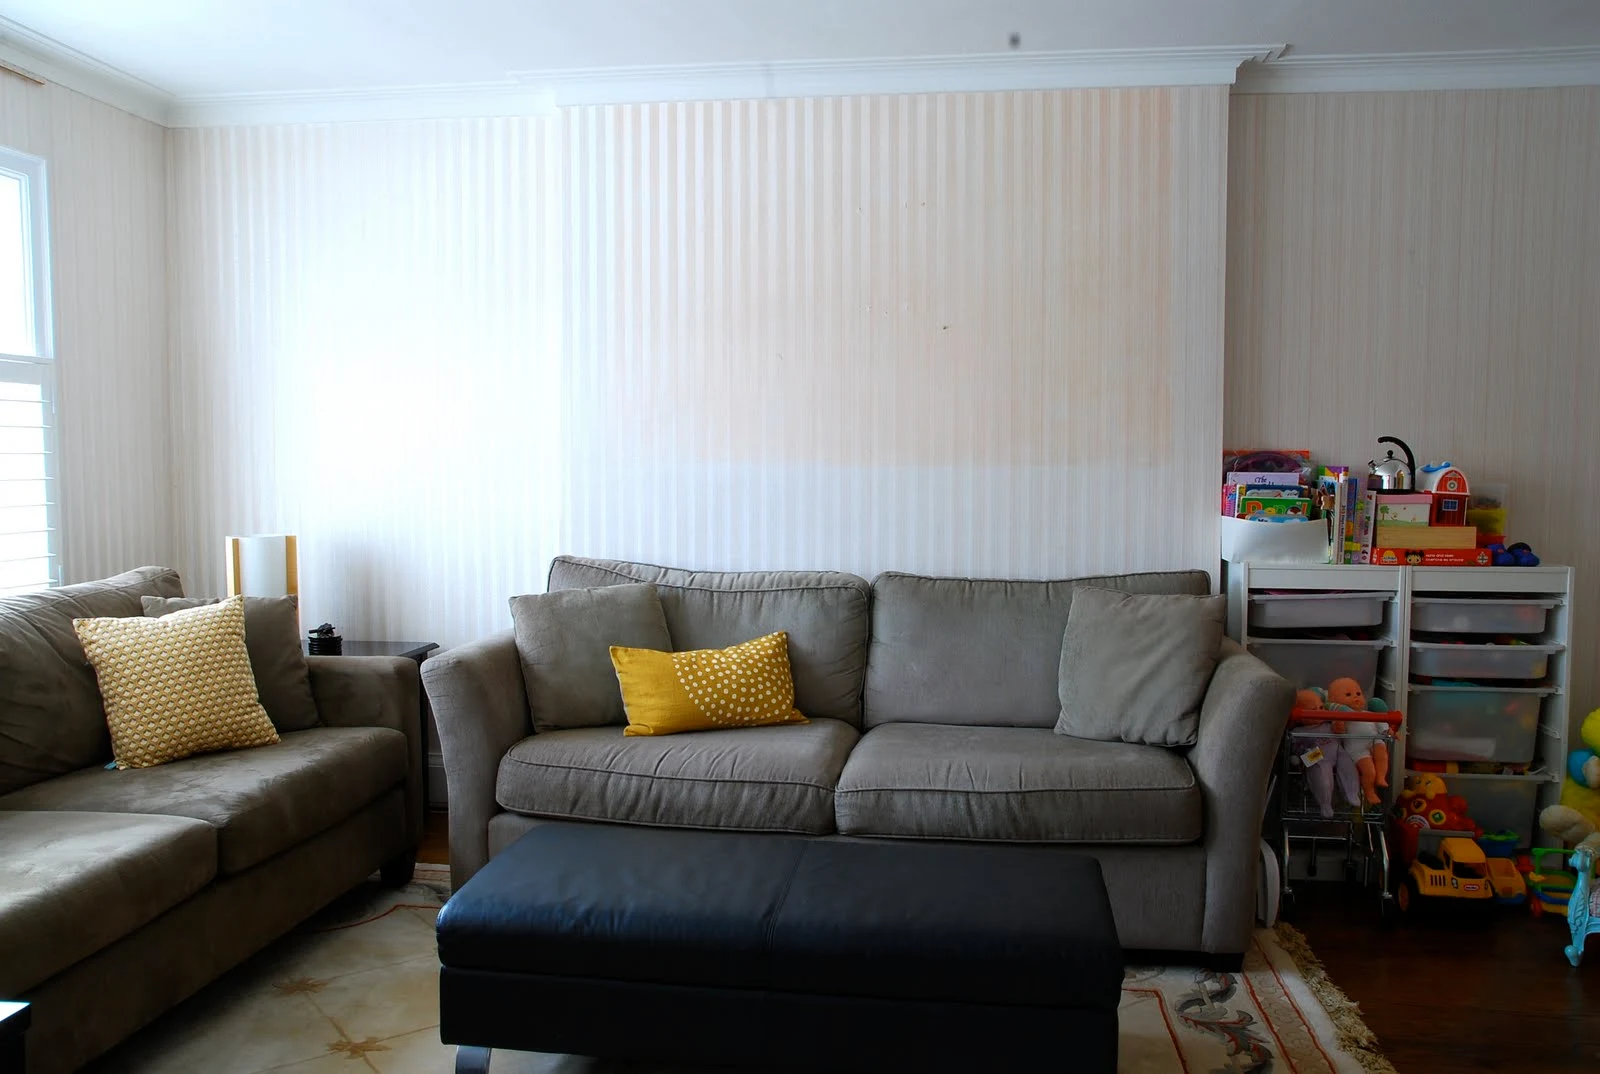 small living room remodel before and after, before and after living room makeover, living room renovation